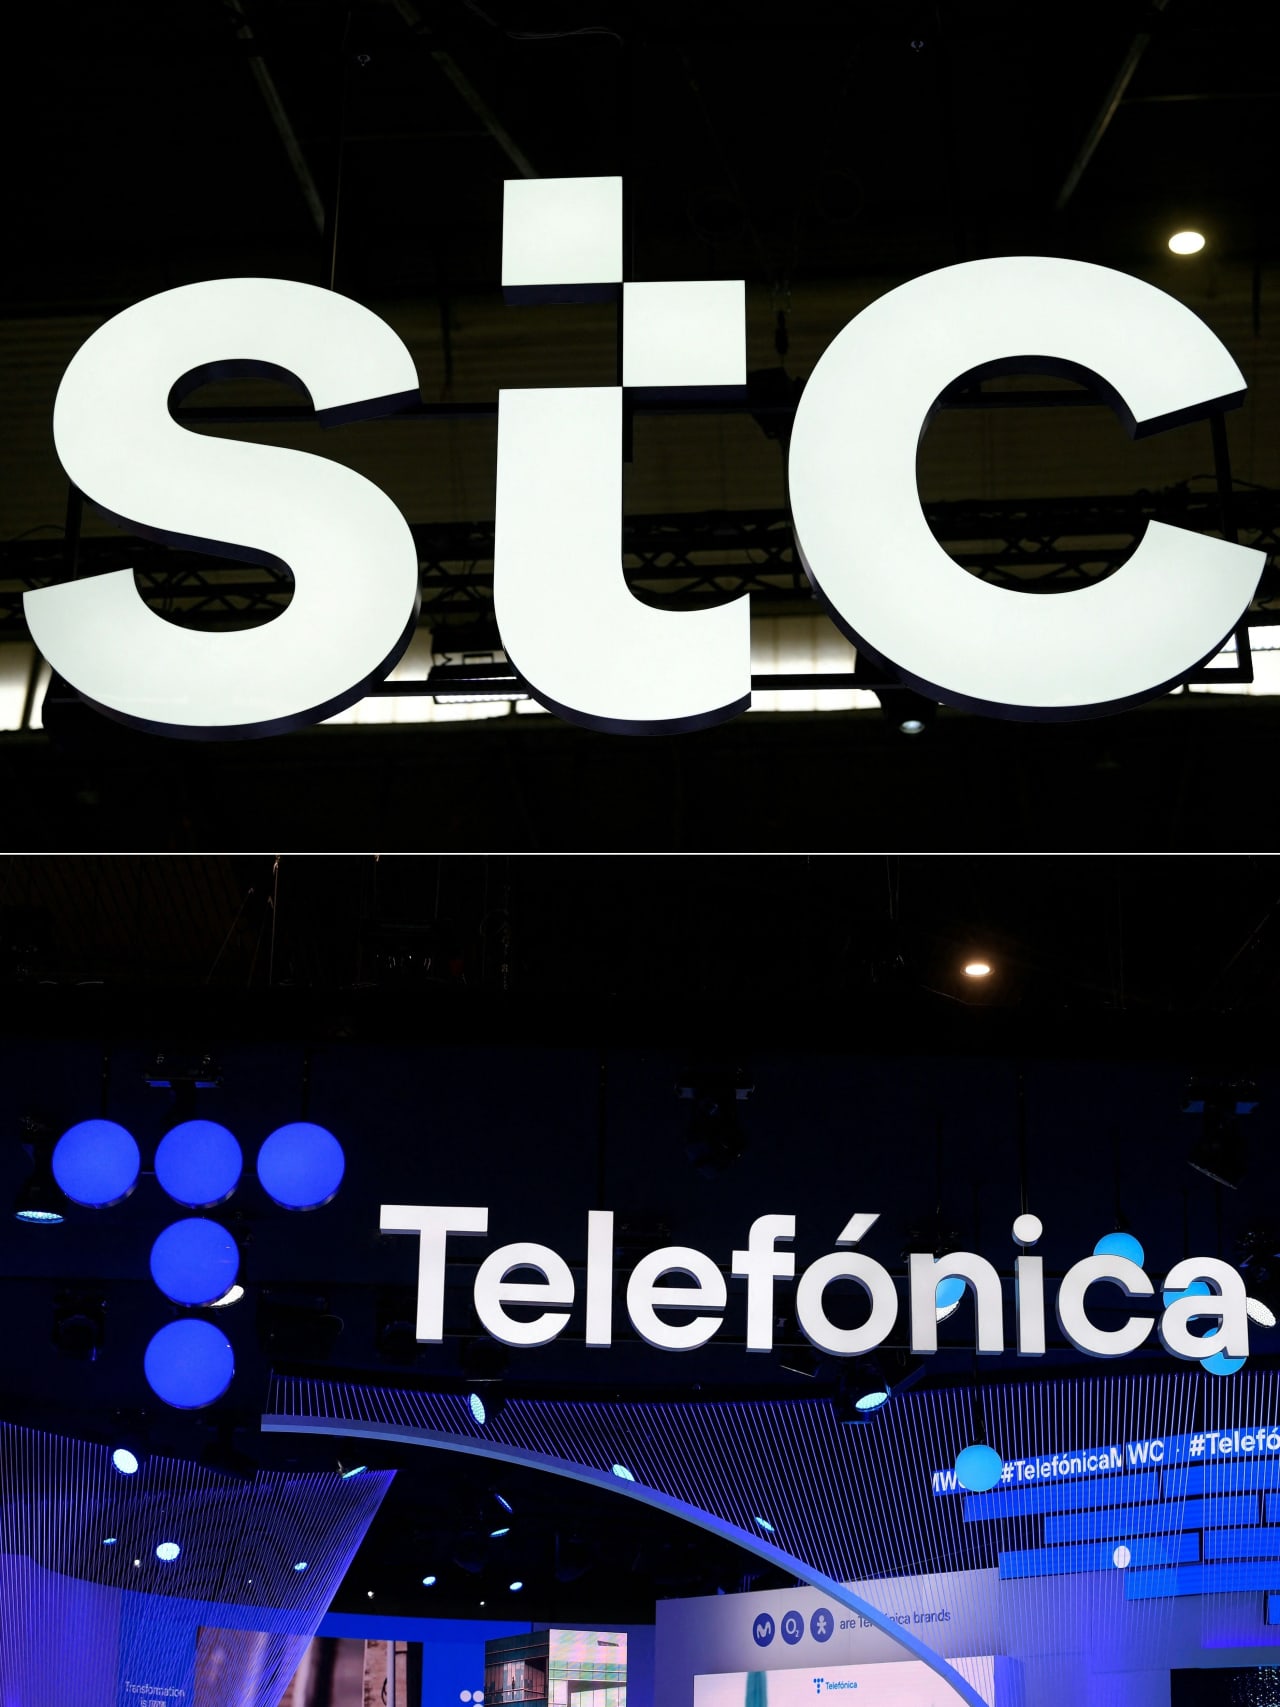 Telefonica stock climbs as Spanish government to match Saudi stake